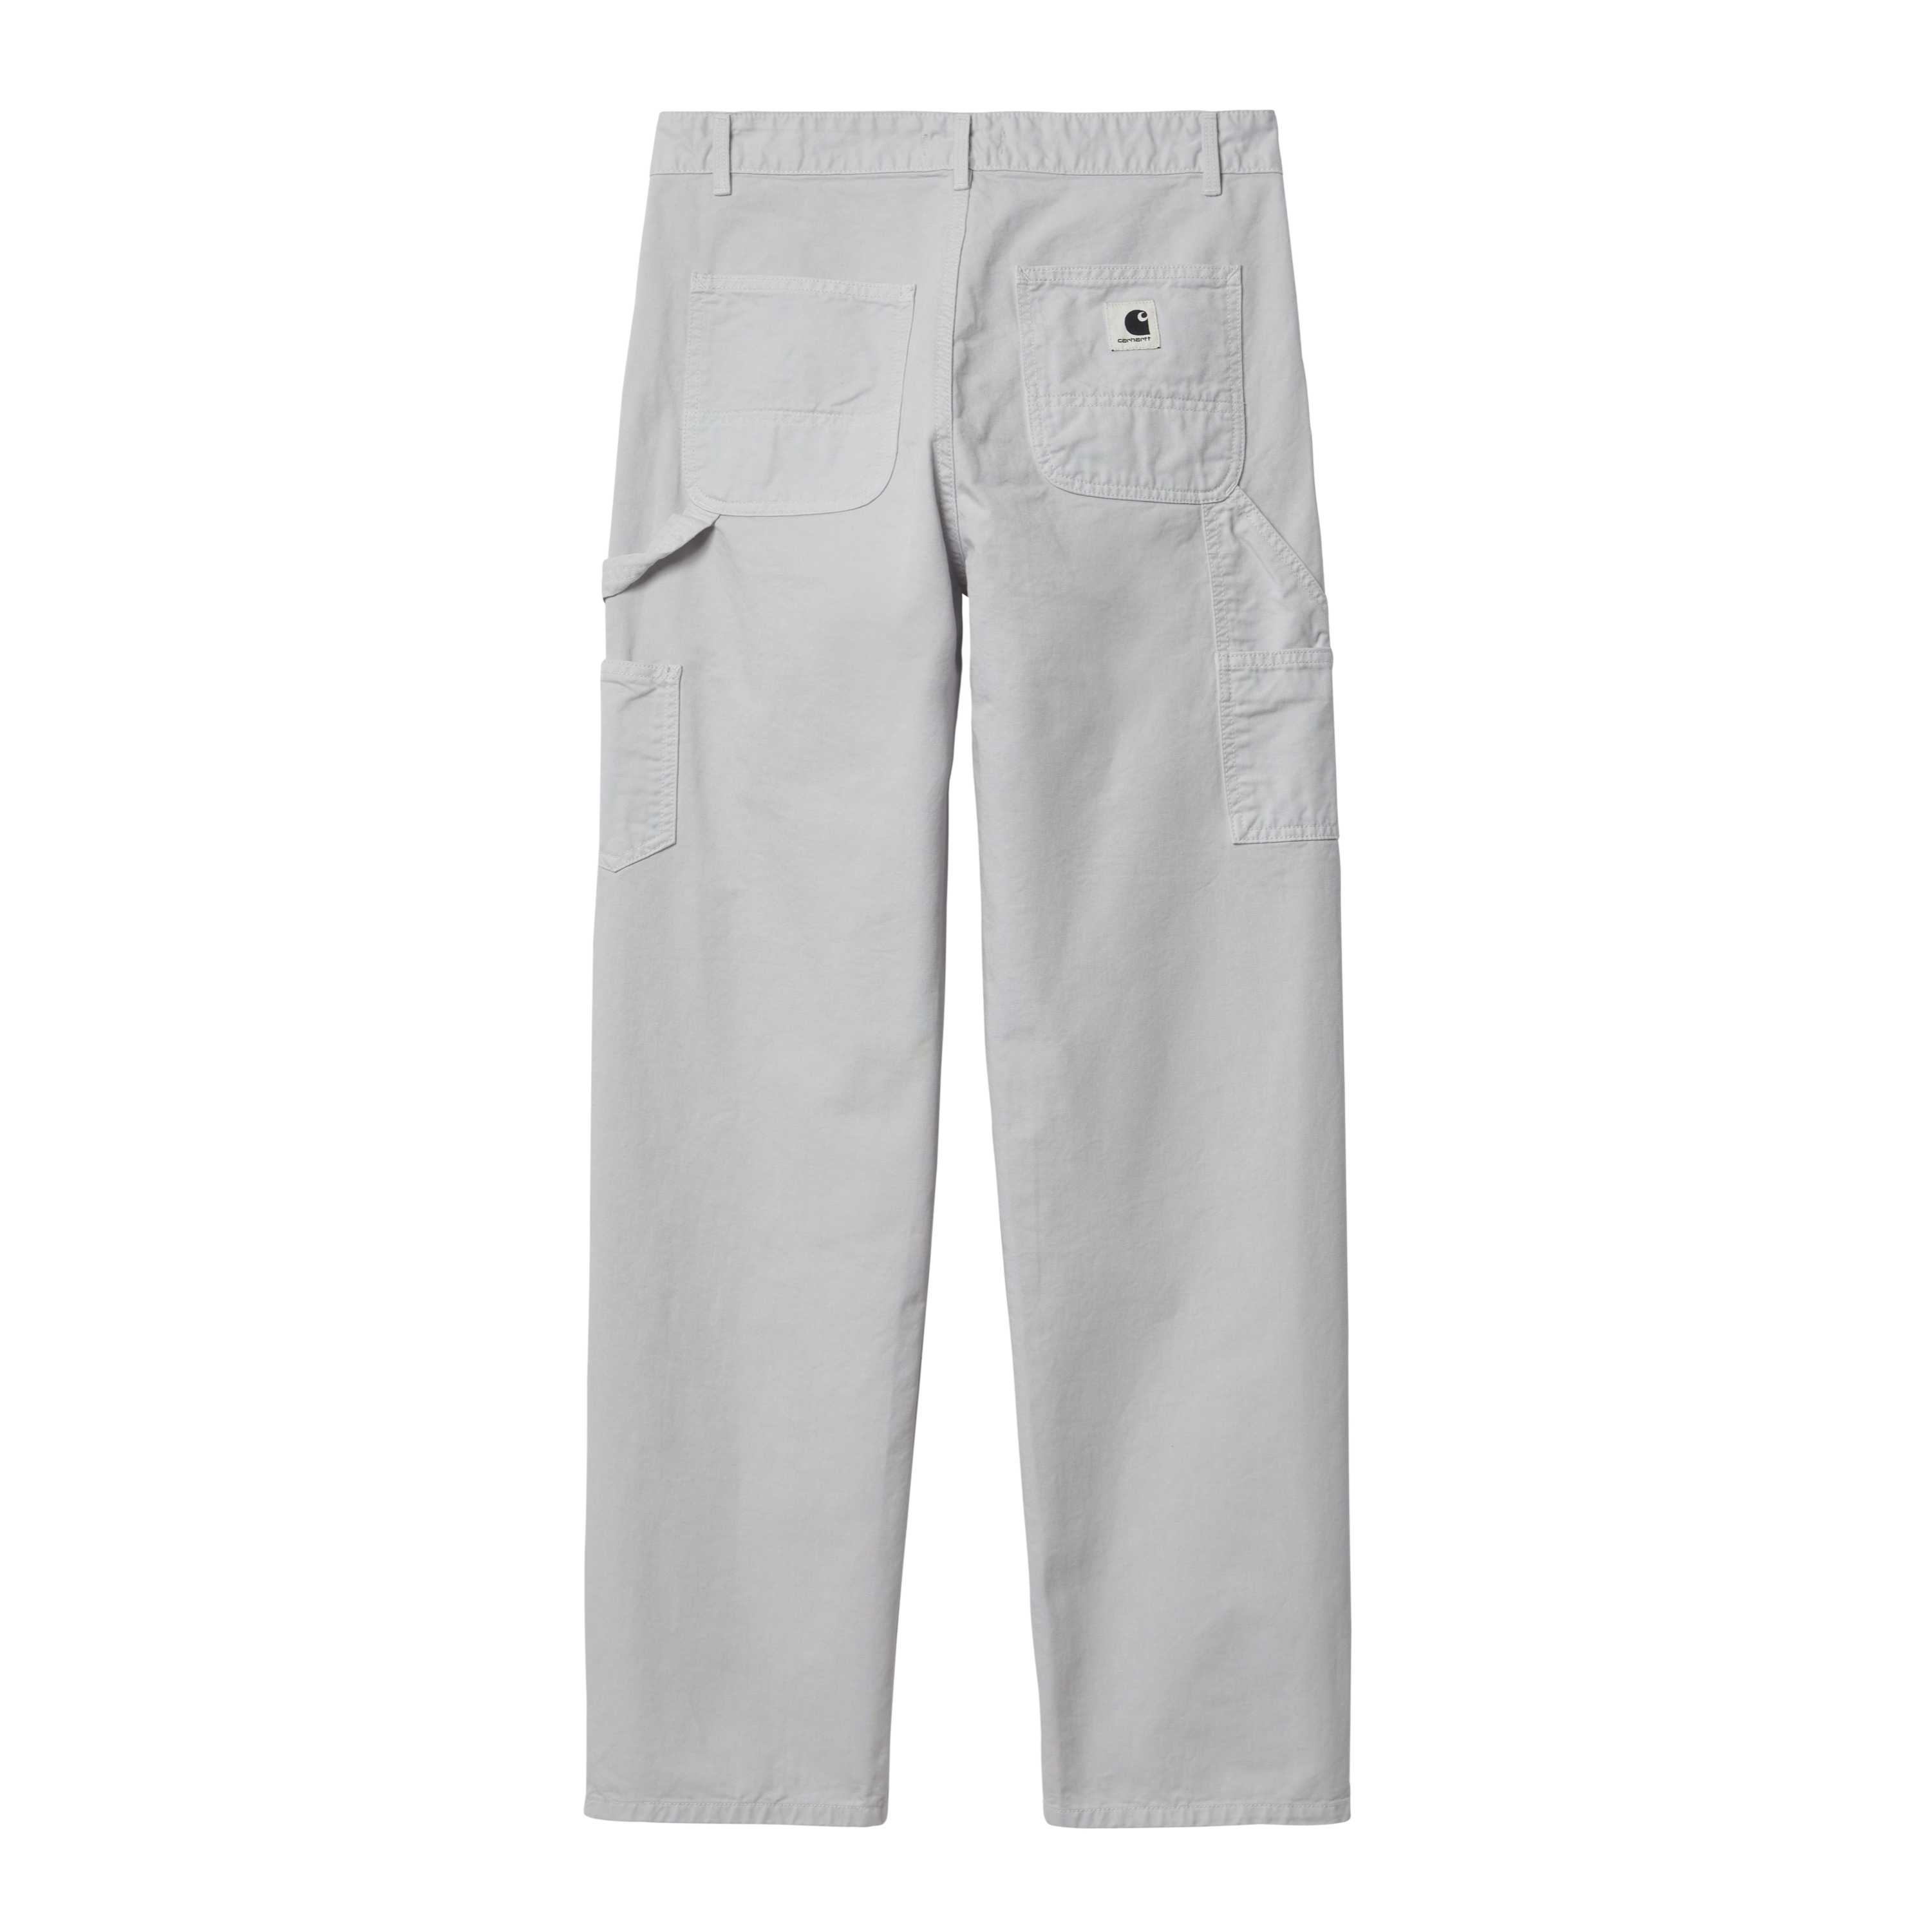 CARHARTT WIP WOMEN PIERCE PANT I032966 TOBACCO RINSED Size W 25 L 00 Color  Article